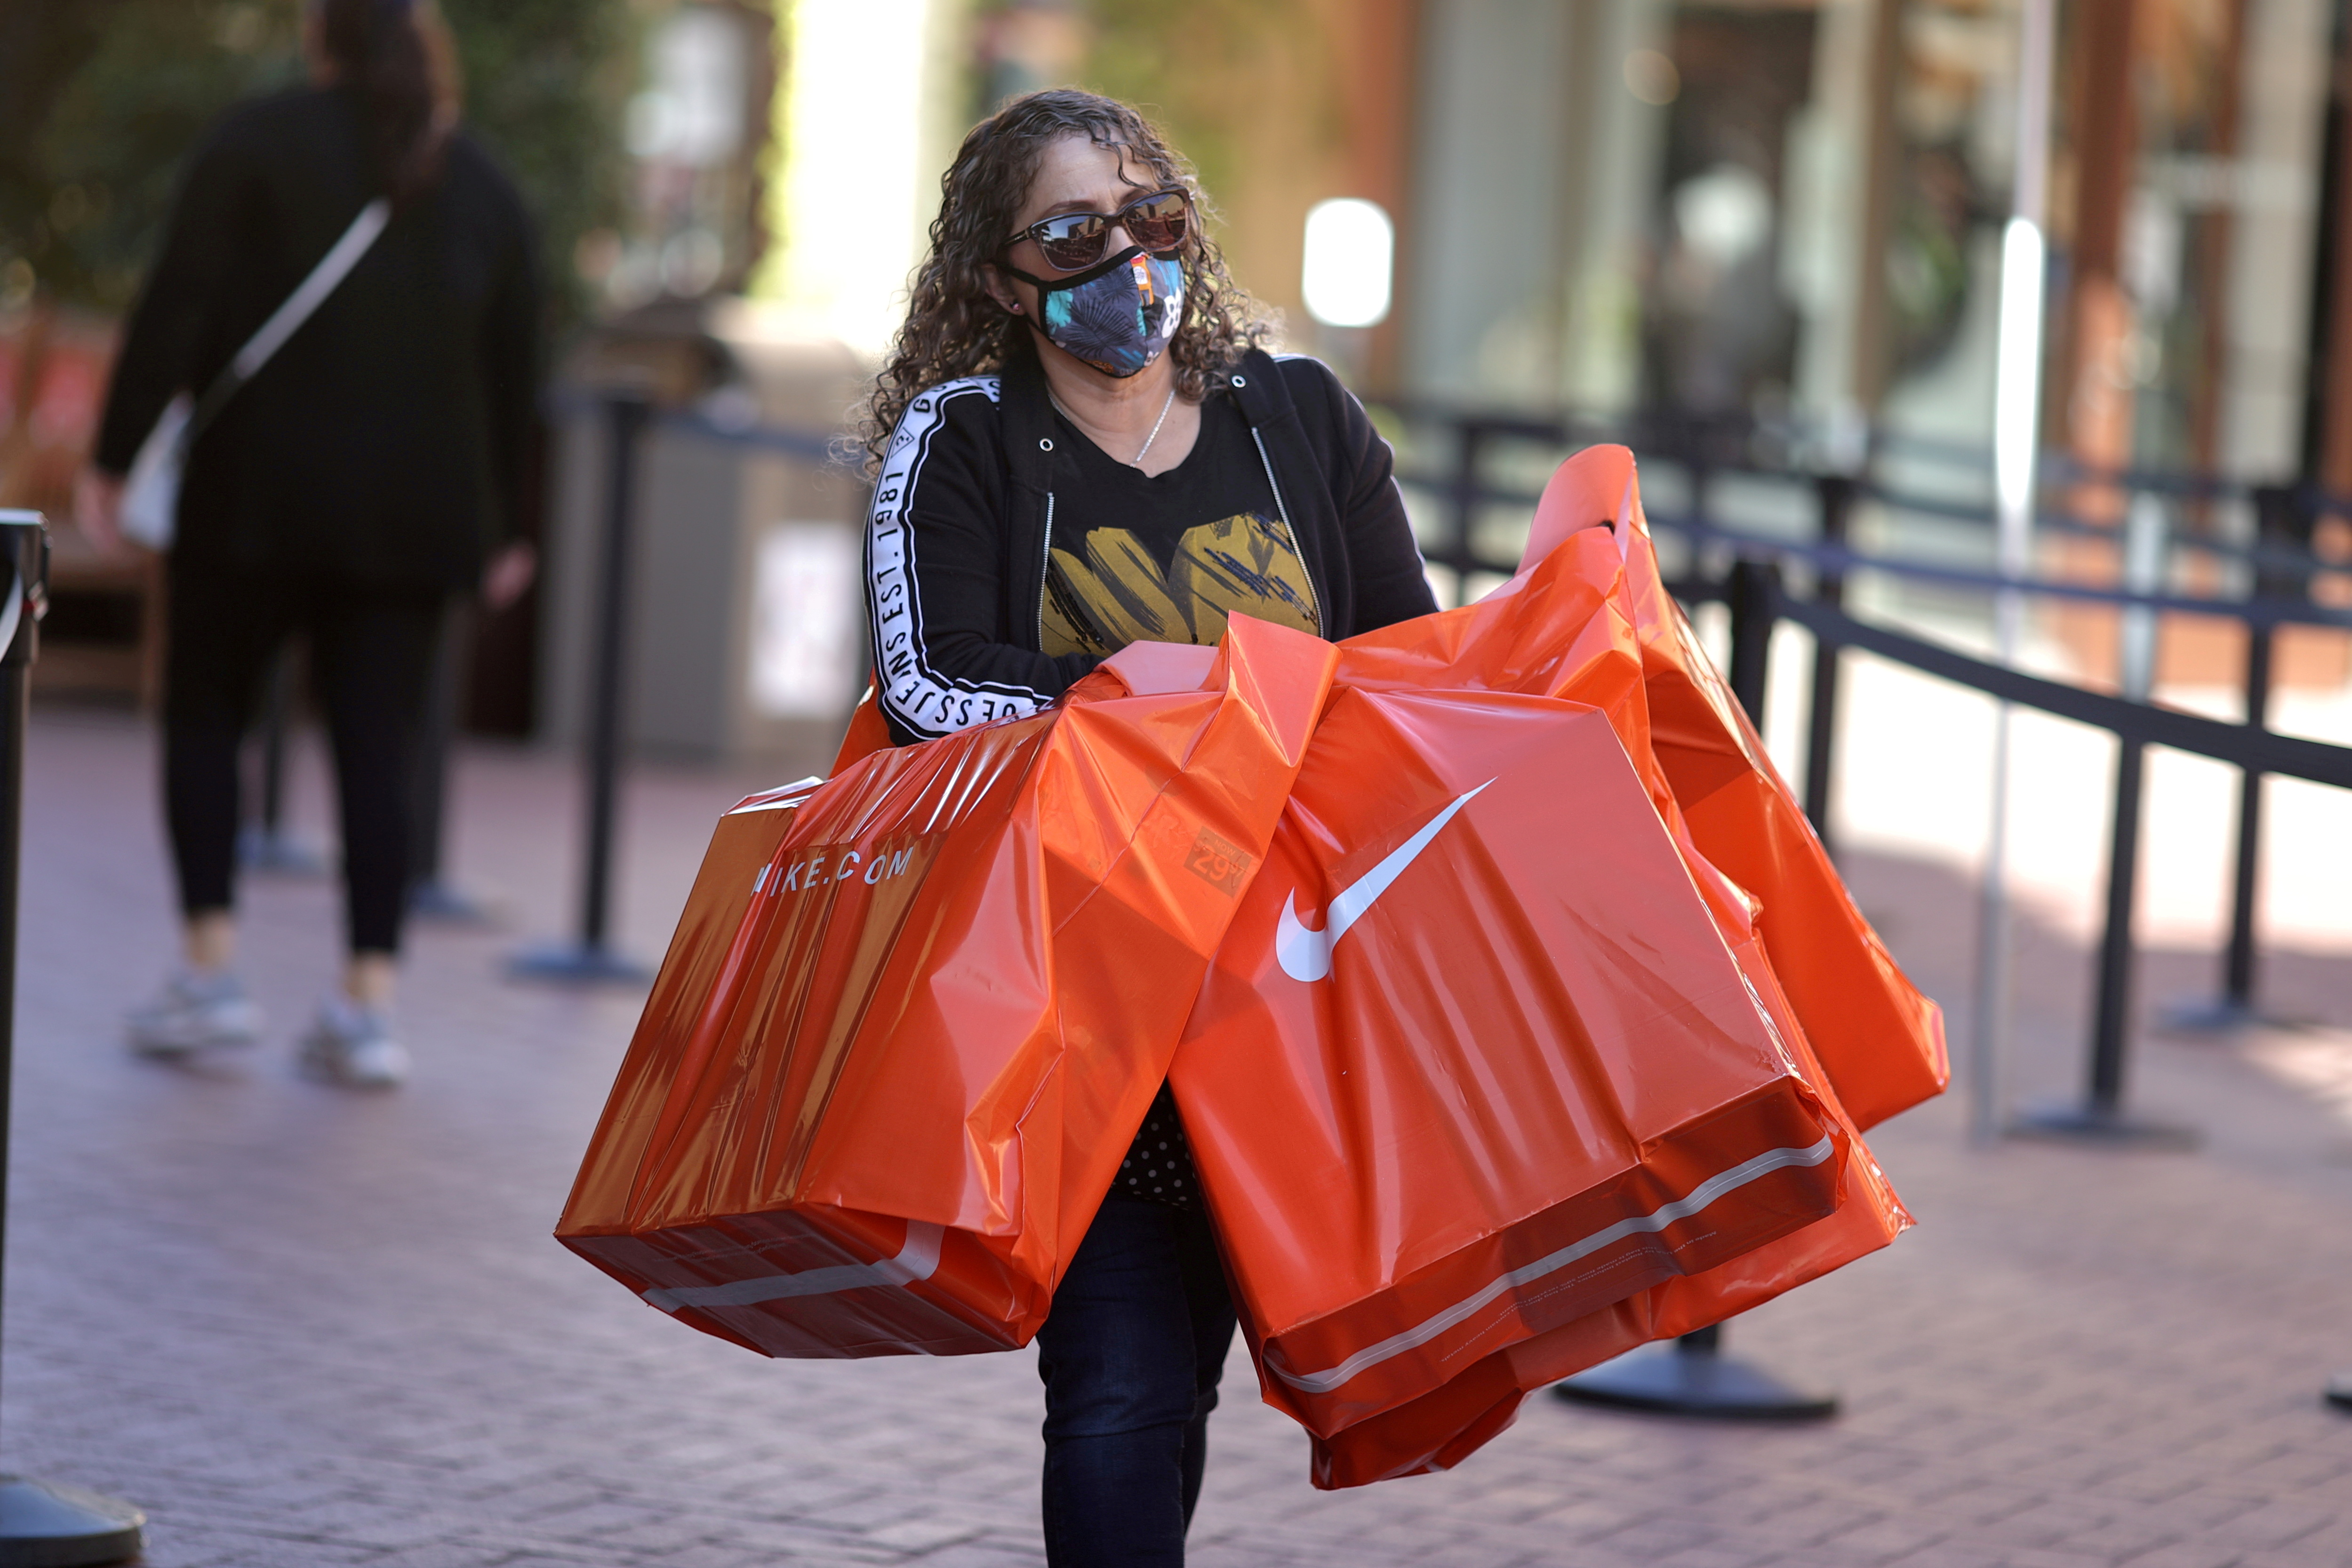 A woman carries Nike shopping bags at the Citadel Outlet mall, as the global outbreak of the coronavirus disease (COVID-19) continues, in Commerce, California, U.S., December 3, 2020. REUTERS/Lucy Nicholson/File Photo/File Photo/File Photo